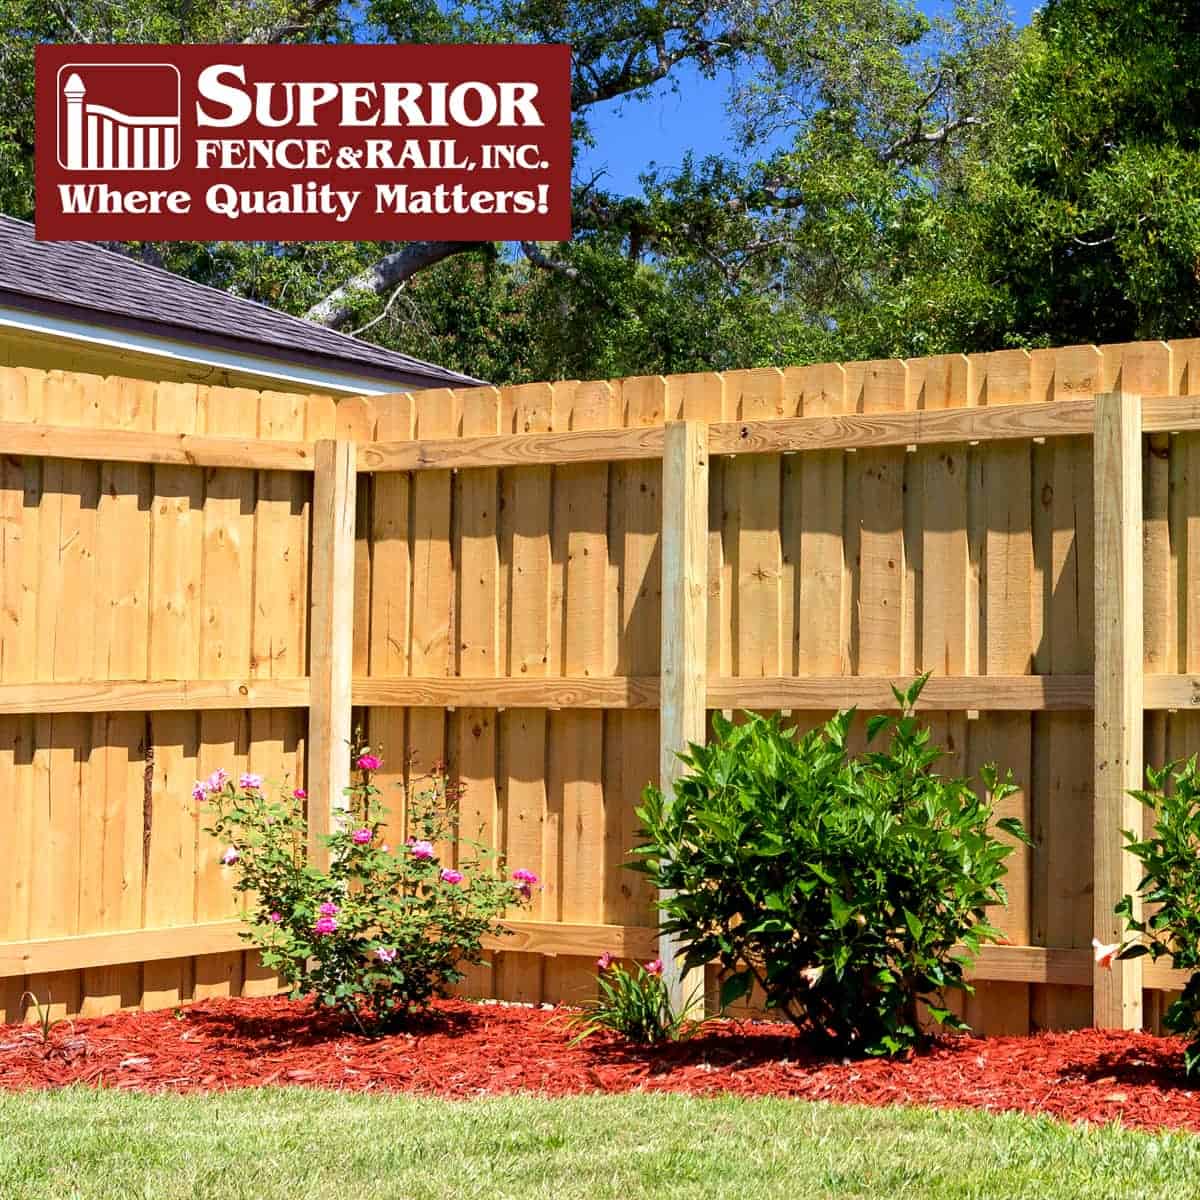 Kingston fence company contractor